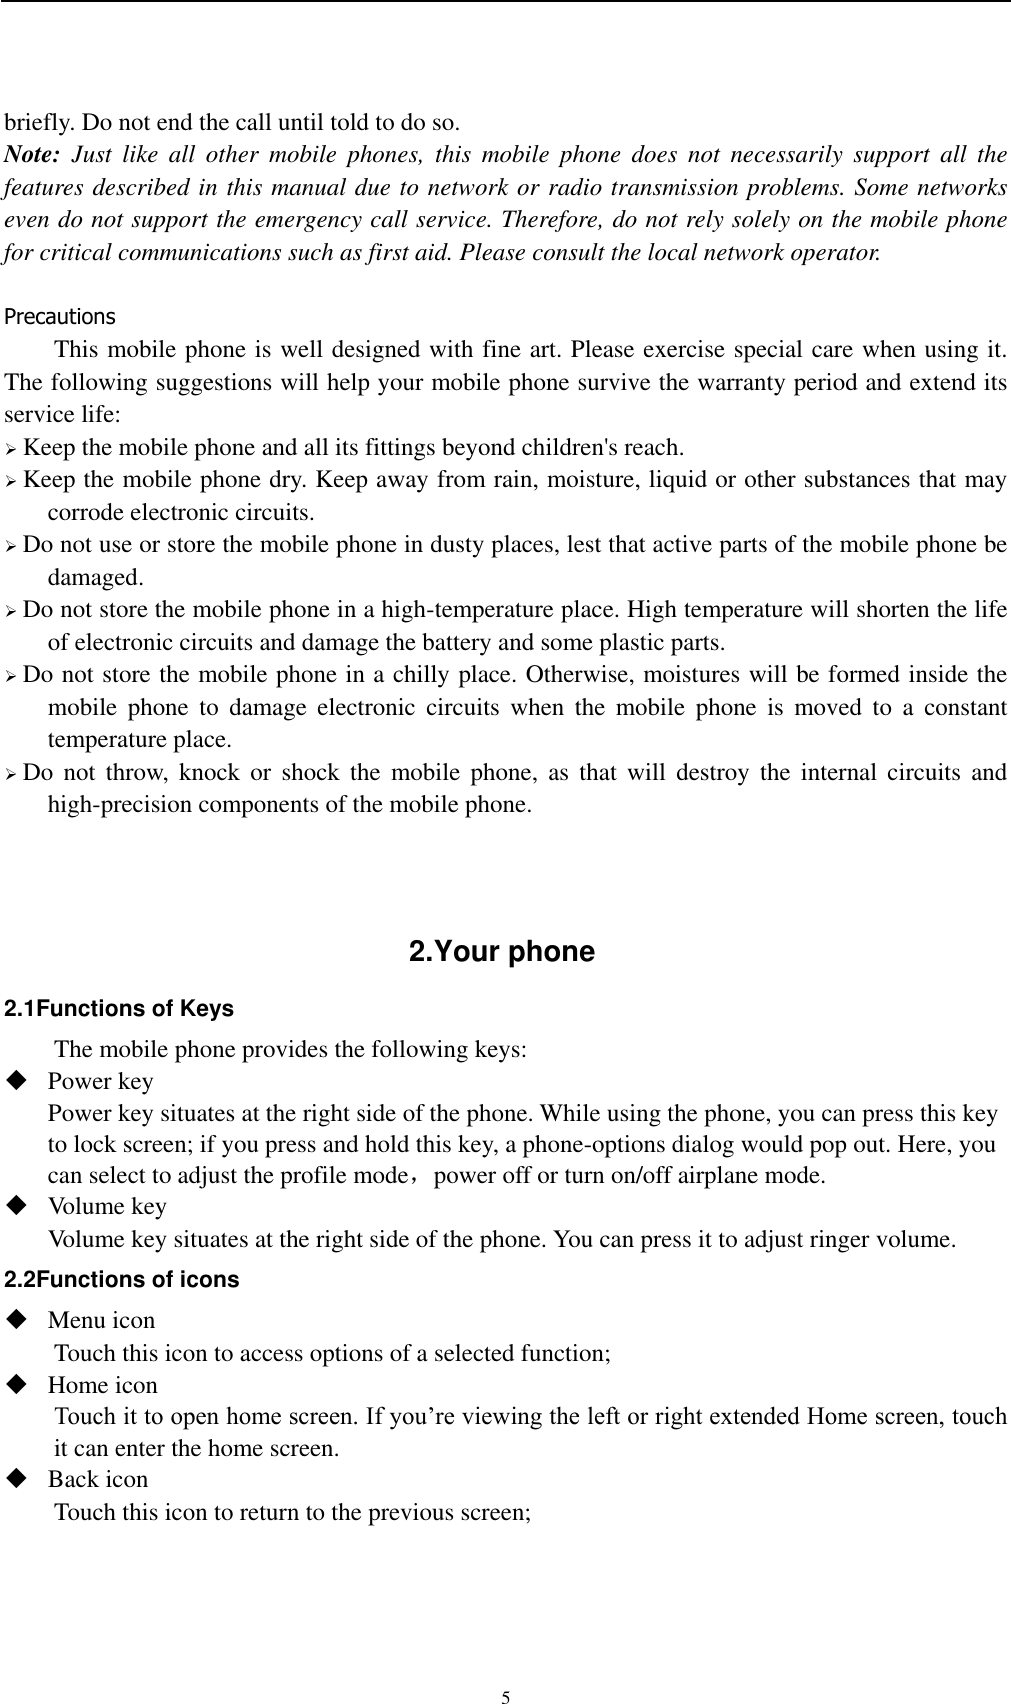    5 briefly. Do not end the call until told to do so. Note:  Just  like  all  other  mobile  phones,  this  mobile  phone  does  not  necessarily  support  all  the features described in this manual due to network or radio transmission problems. Some networks even do not support the emergency call service. Therefore, do not rely solely on the mobile phone for critical communications such as first aid. Please consult the local network operator.  Precautions This mobile phone is well designed with fine art. Please exercise special care when using it. The following suggestions will help your mobile phone survive the warranty period and extend its service life:  Keep the mobile phone and all its fittings beyond children&apos;s reach.  Keep the mobile phone dry. Keep away from rain, moisture, liquid or other substances that may corrode electronic circuits.  Do not use or store the mobile phone in dusty places, lest that active parts of the mobile phone be damaged.  Do not store the mobile phone in a high-temperature place. High temperature will shorten the life of electronic circuits and damage the battery and some plastic parts.  Do not store the mobile phone in a chilly place. Otherwise, moistures will be formed inside the mobile  phone  to  damage  electronic  circuits  when  the  mobile  phone  is  moved  to  a  constant temperature place.  Do  not  throw,  knock  or  shock  the  mobile  phone,  as  that  will  destroy  the  internal  circuits  and high-precision components of the mobile phone.    2.Your phone 2.1Functions of Keys The mobile phone provides the following keys:  Power key Power key situates at the right side of the phone. While using the phone, you can press this key to lock screen; if you press and hold this key, a phone-options dialog would pop out. Here, you can select to adjust the profile mode，power off or turn on/off airplane mode.  Volume key Volume key situates at the right side of the phone. You can press it to adjust ringer volume. 2.2Functions of icons  Menu icon Touch this icon to access options of a selected function;  Home icon Touch it to open home screen. If you’re viewing the left or right extended Home screen, touch it can enter the home screen.  Back icon Touch this icon to return to the previous screen;  